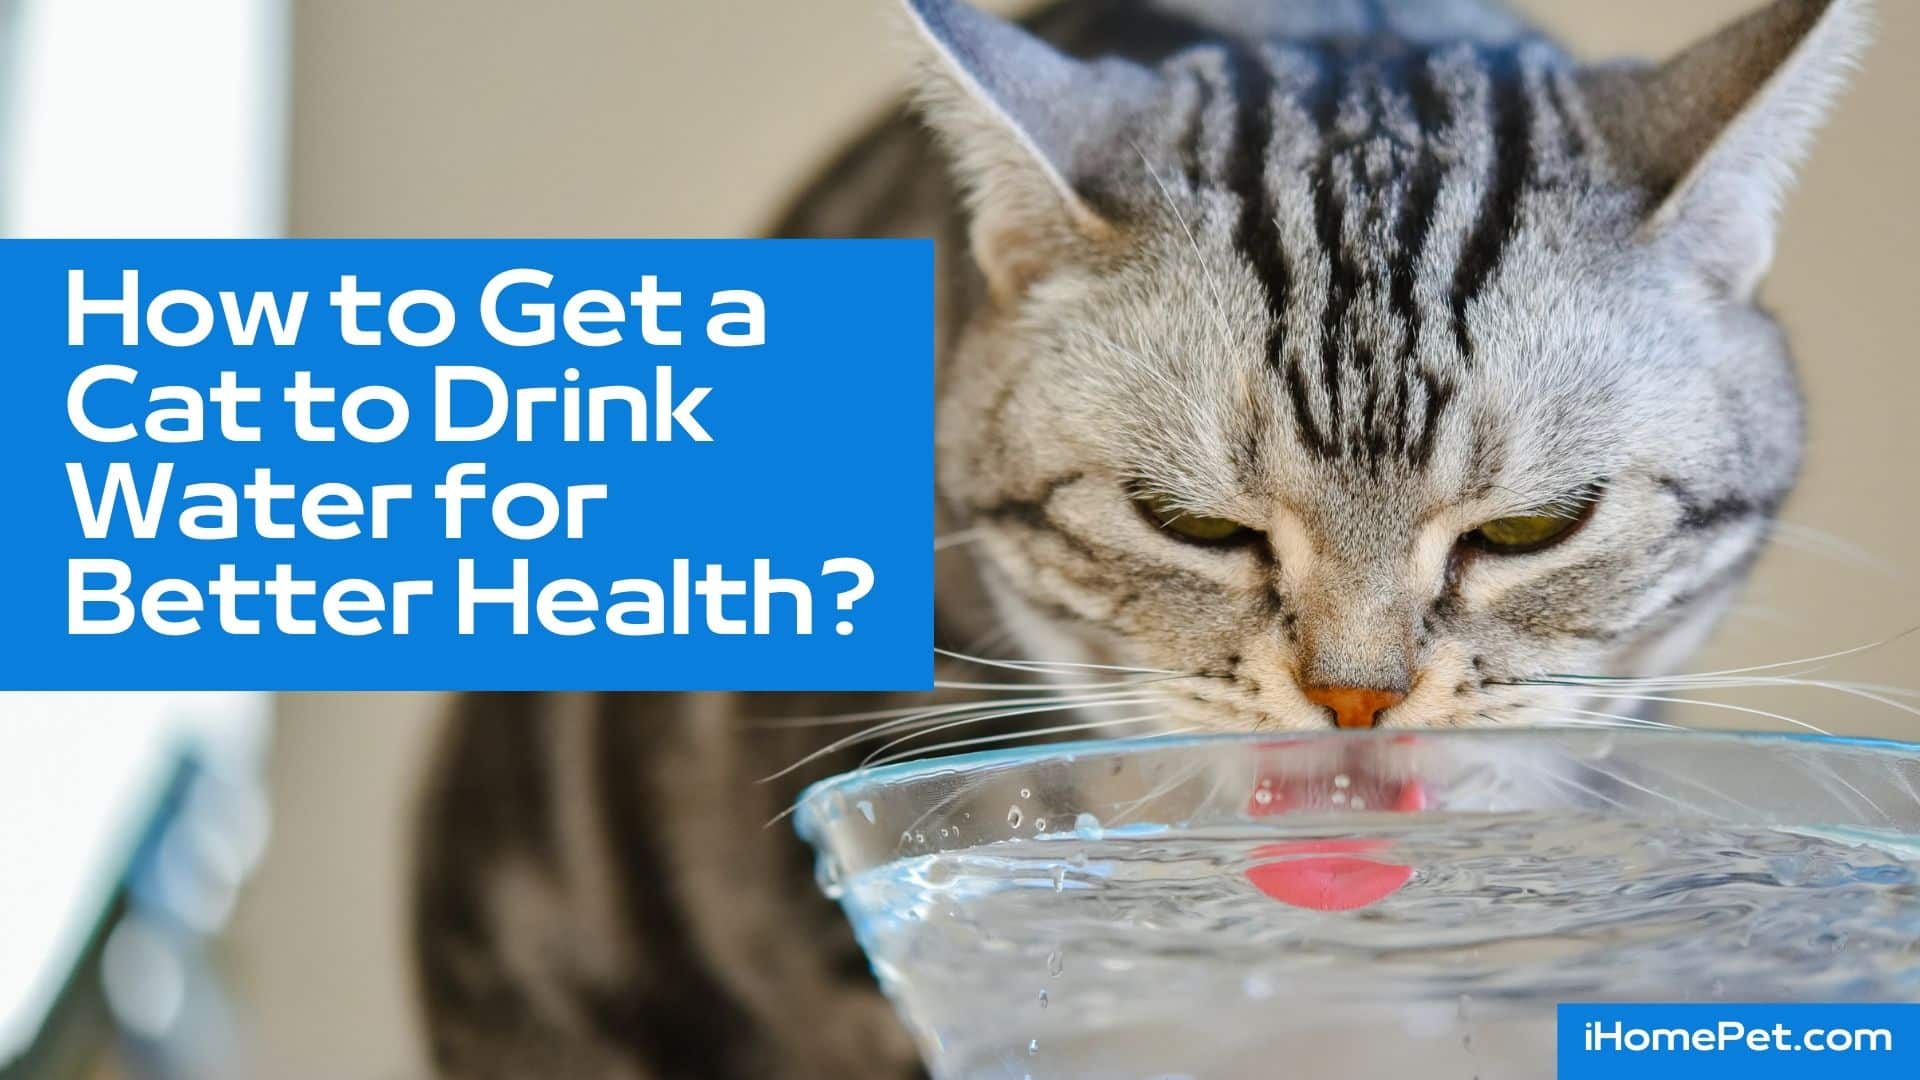 Water can help prevent health issues